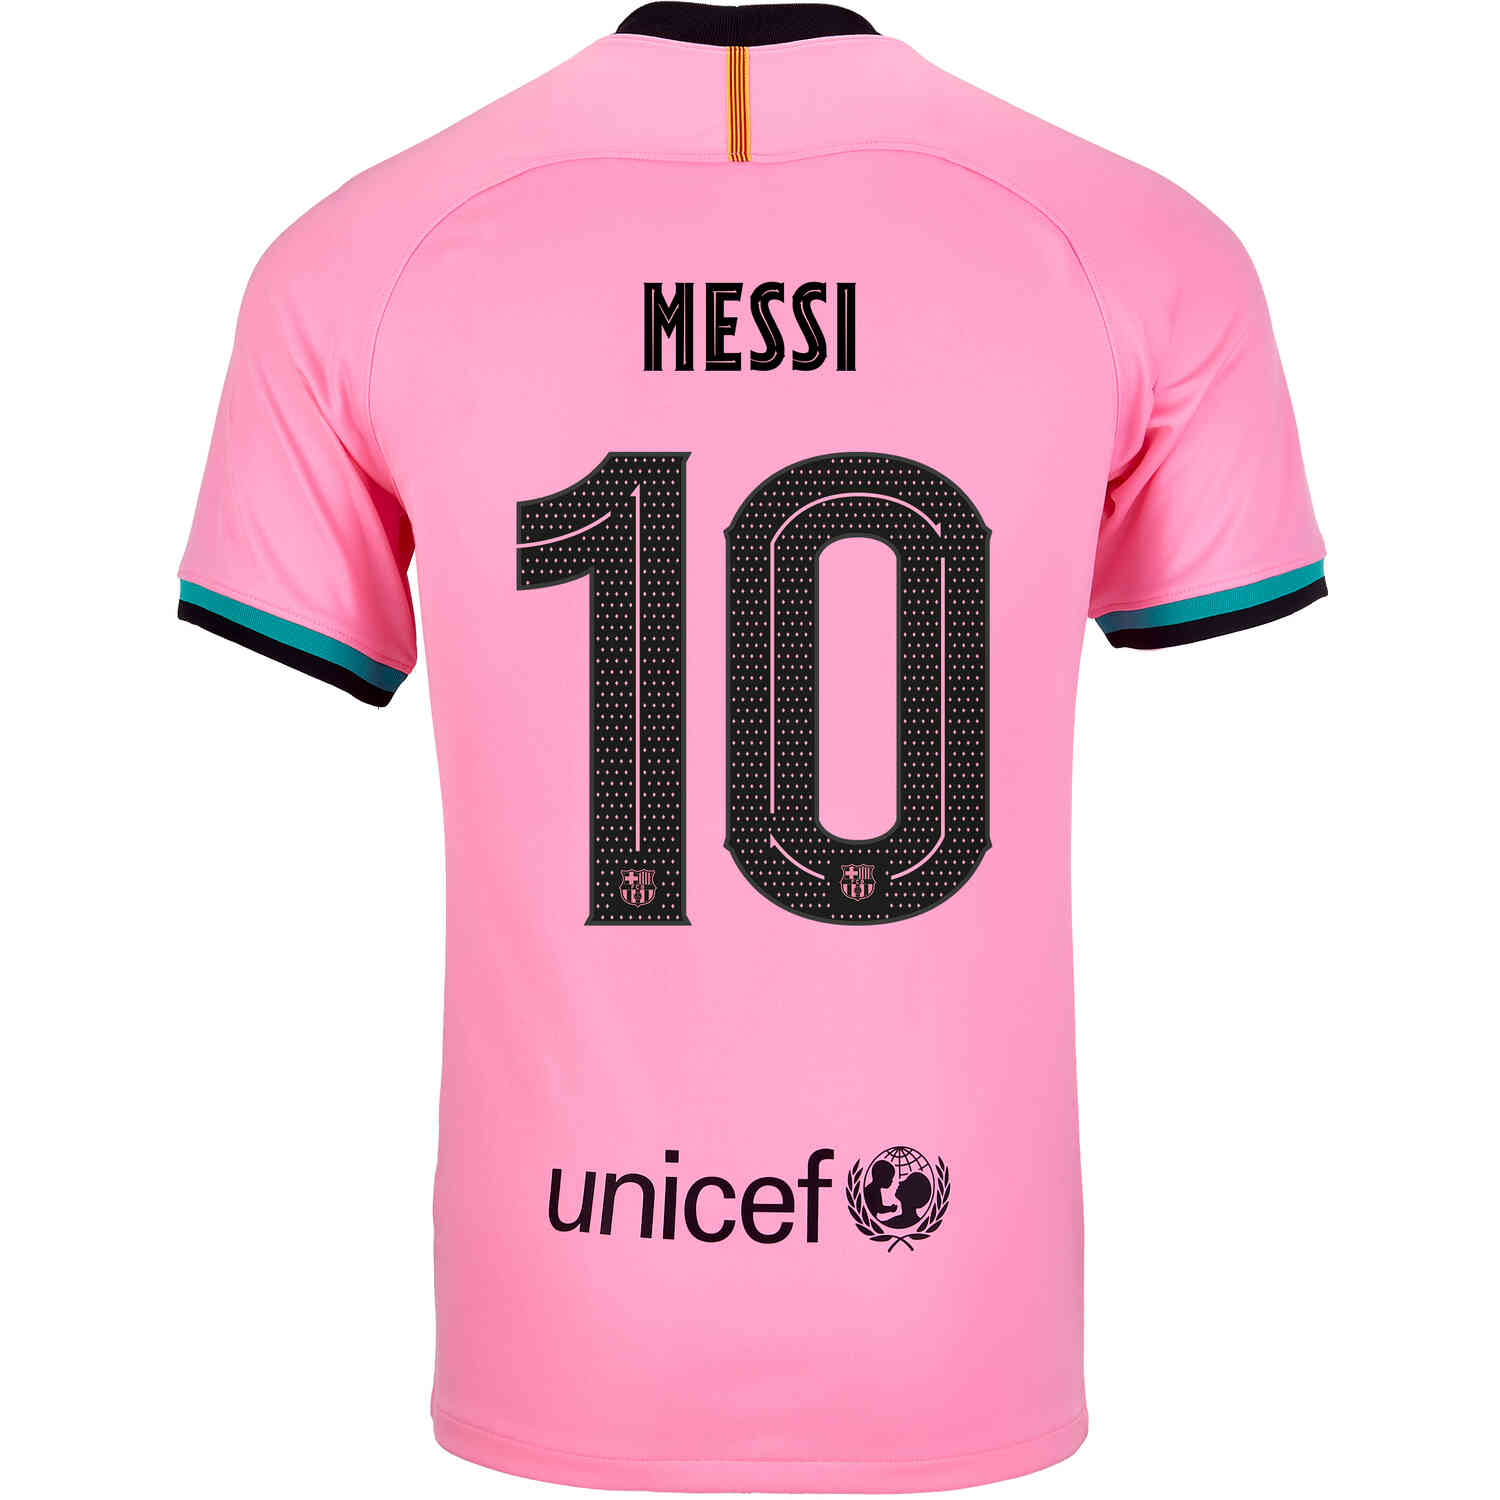 messi official jersey